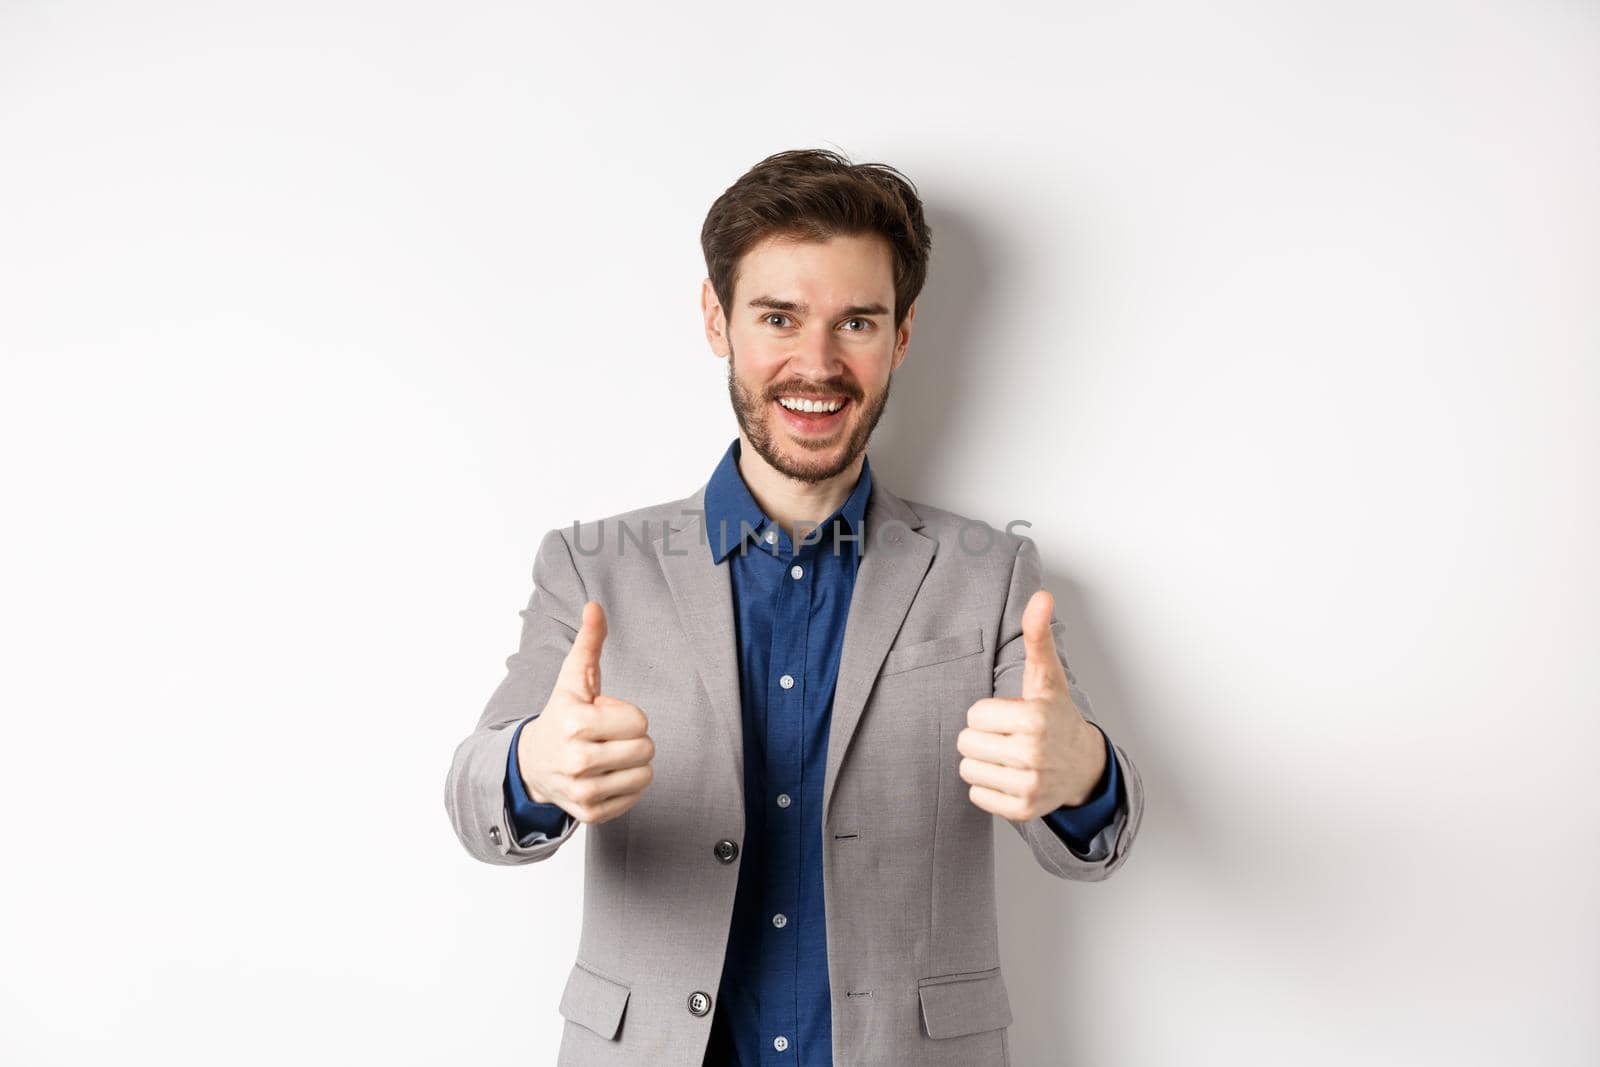 Cheerful and positive young man in business suit showing thumbs up and smiling, like something good, praise good job, standing happy on white background.